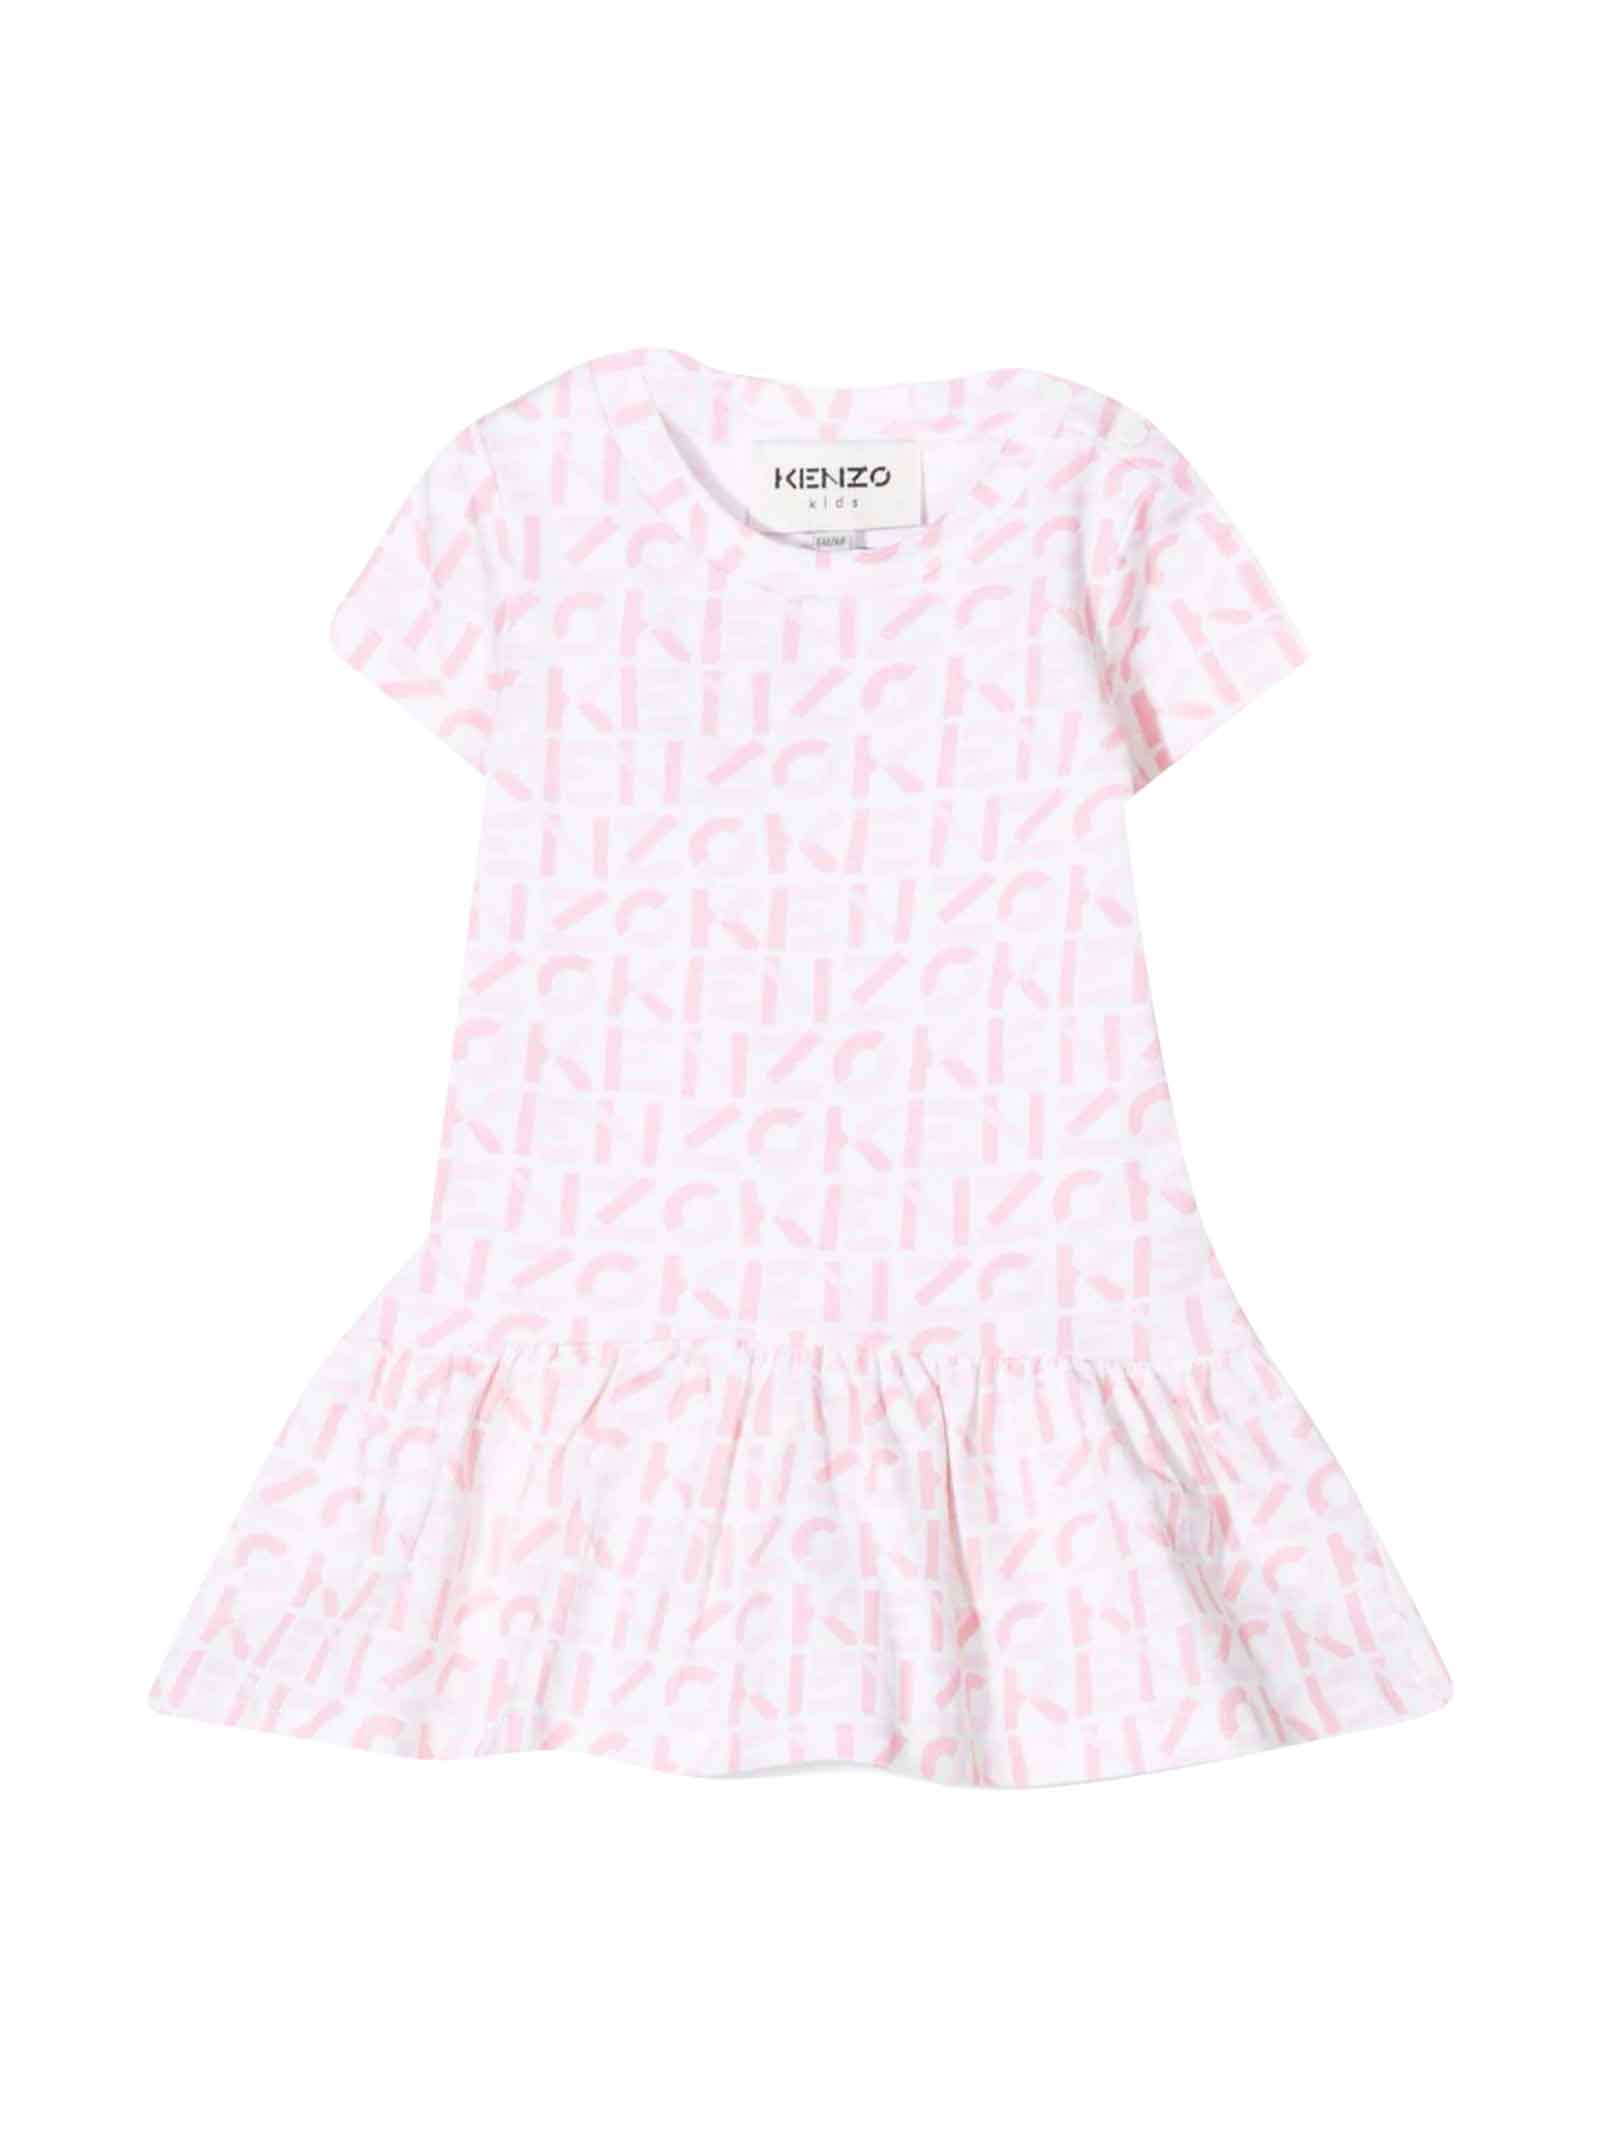 Kenzo Kids White / Pink Baby Girl Dress T-shirt Model With All Over Print By